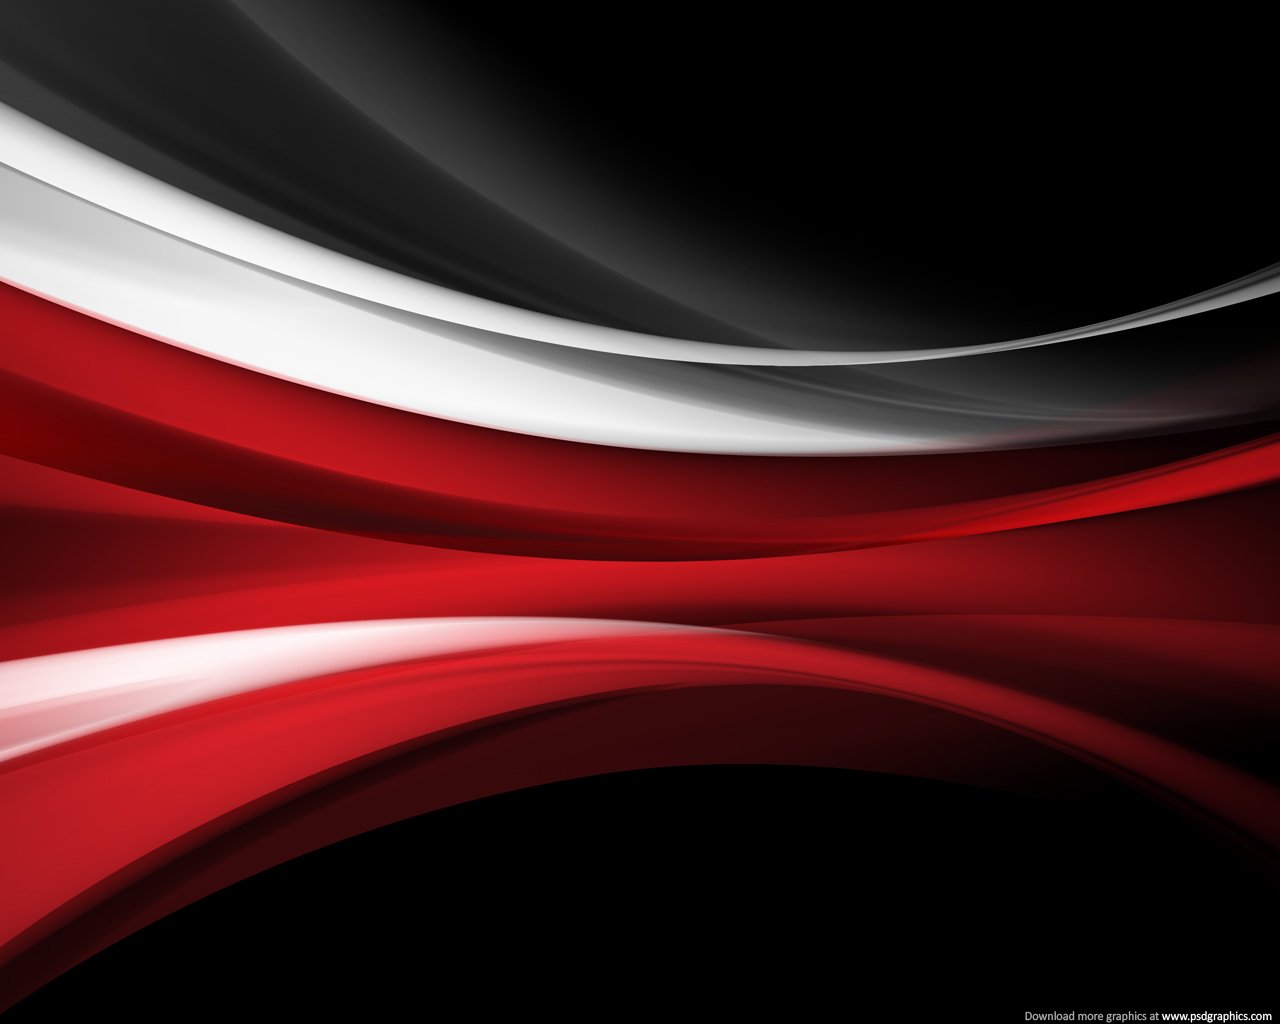  color theme red black white keywords flowing red light trails black 1280x1024